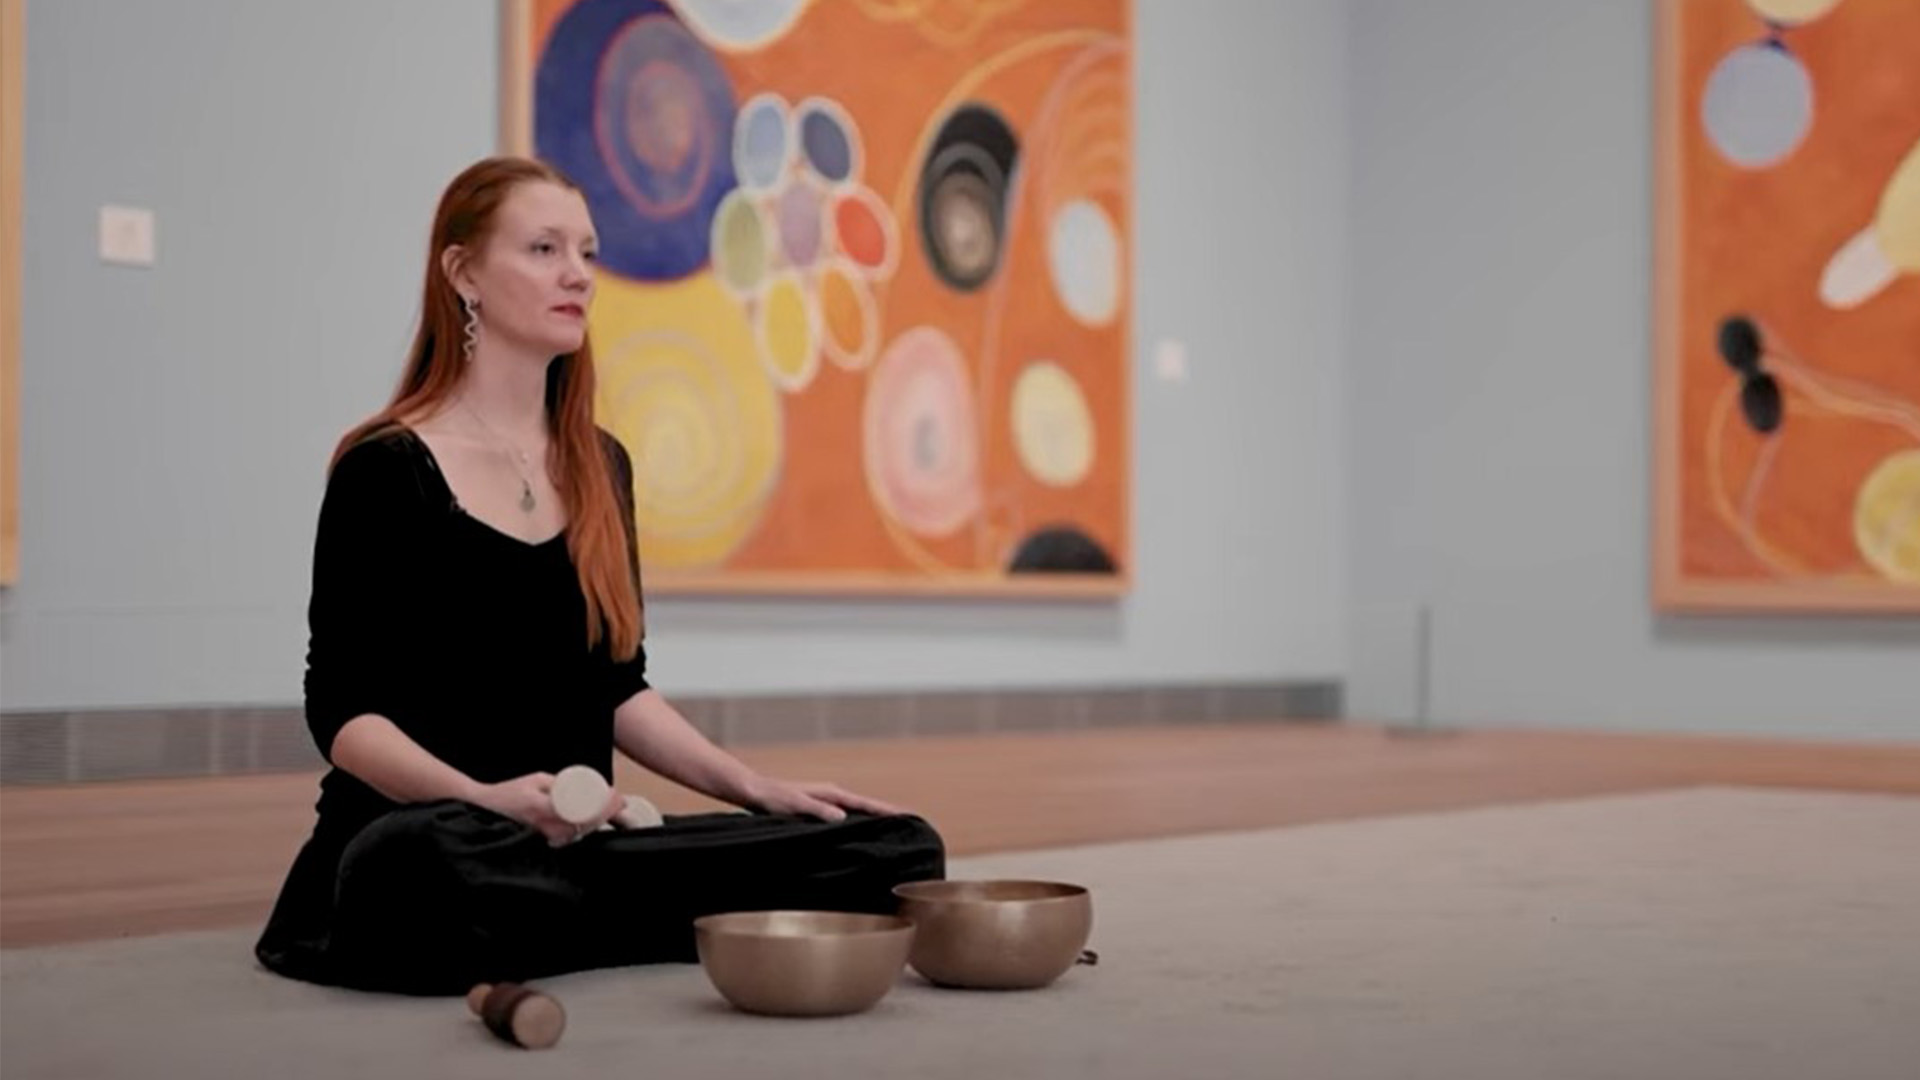 Meditation guide Jessica Eldenstjärna is sitting with crossed legs on the floor in front of some of Hilma af Klint's paintings from the series "The Ten Largests"